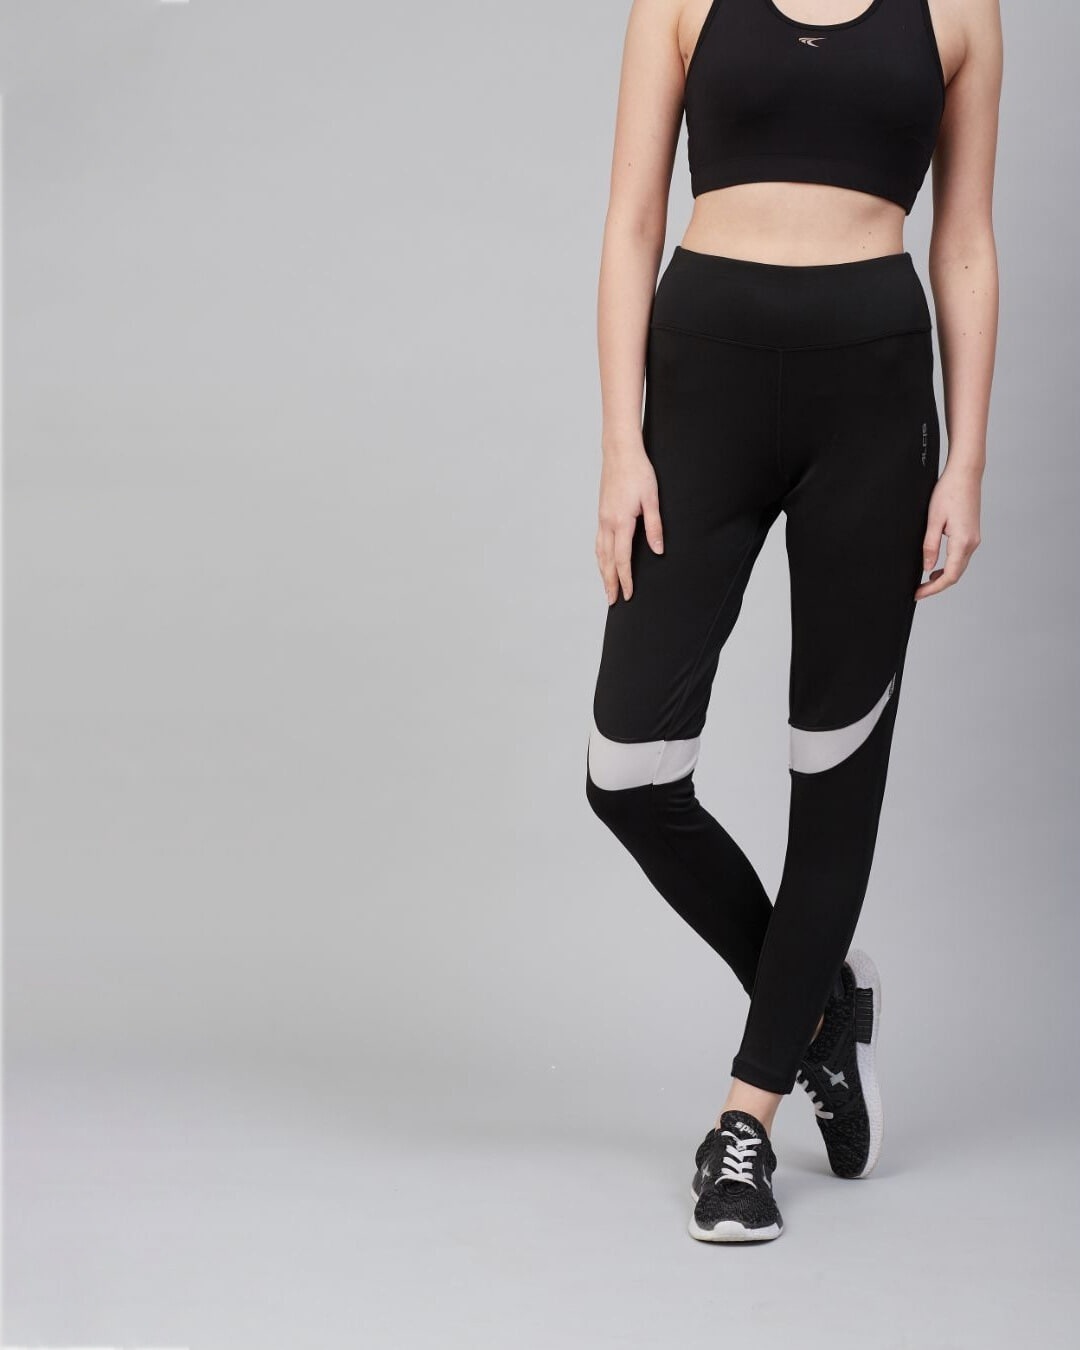 Shop Women Black Solid Training Tights-Front